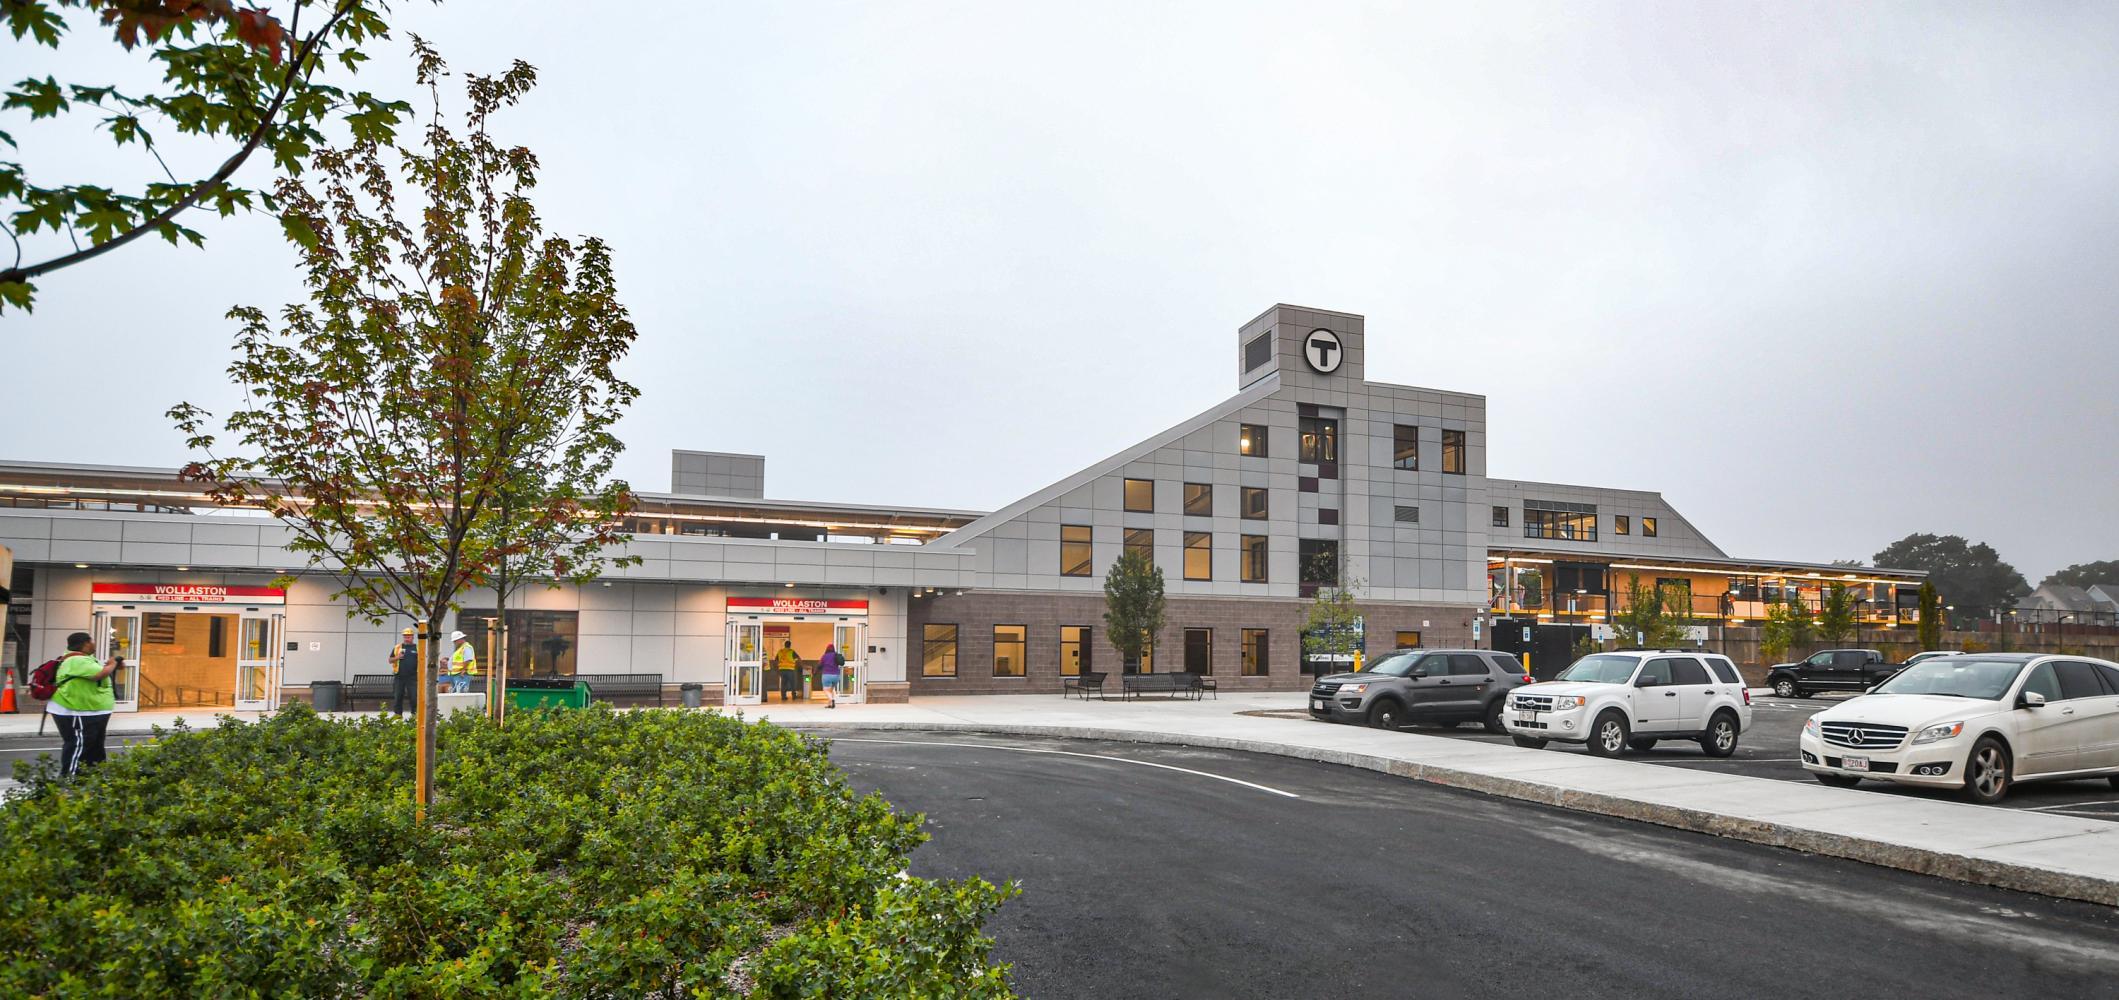 The building facade and entrances of newly renovated Wollaston Station, with the platform to the right, viewed from the parking lot.